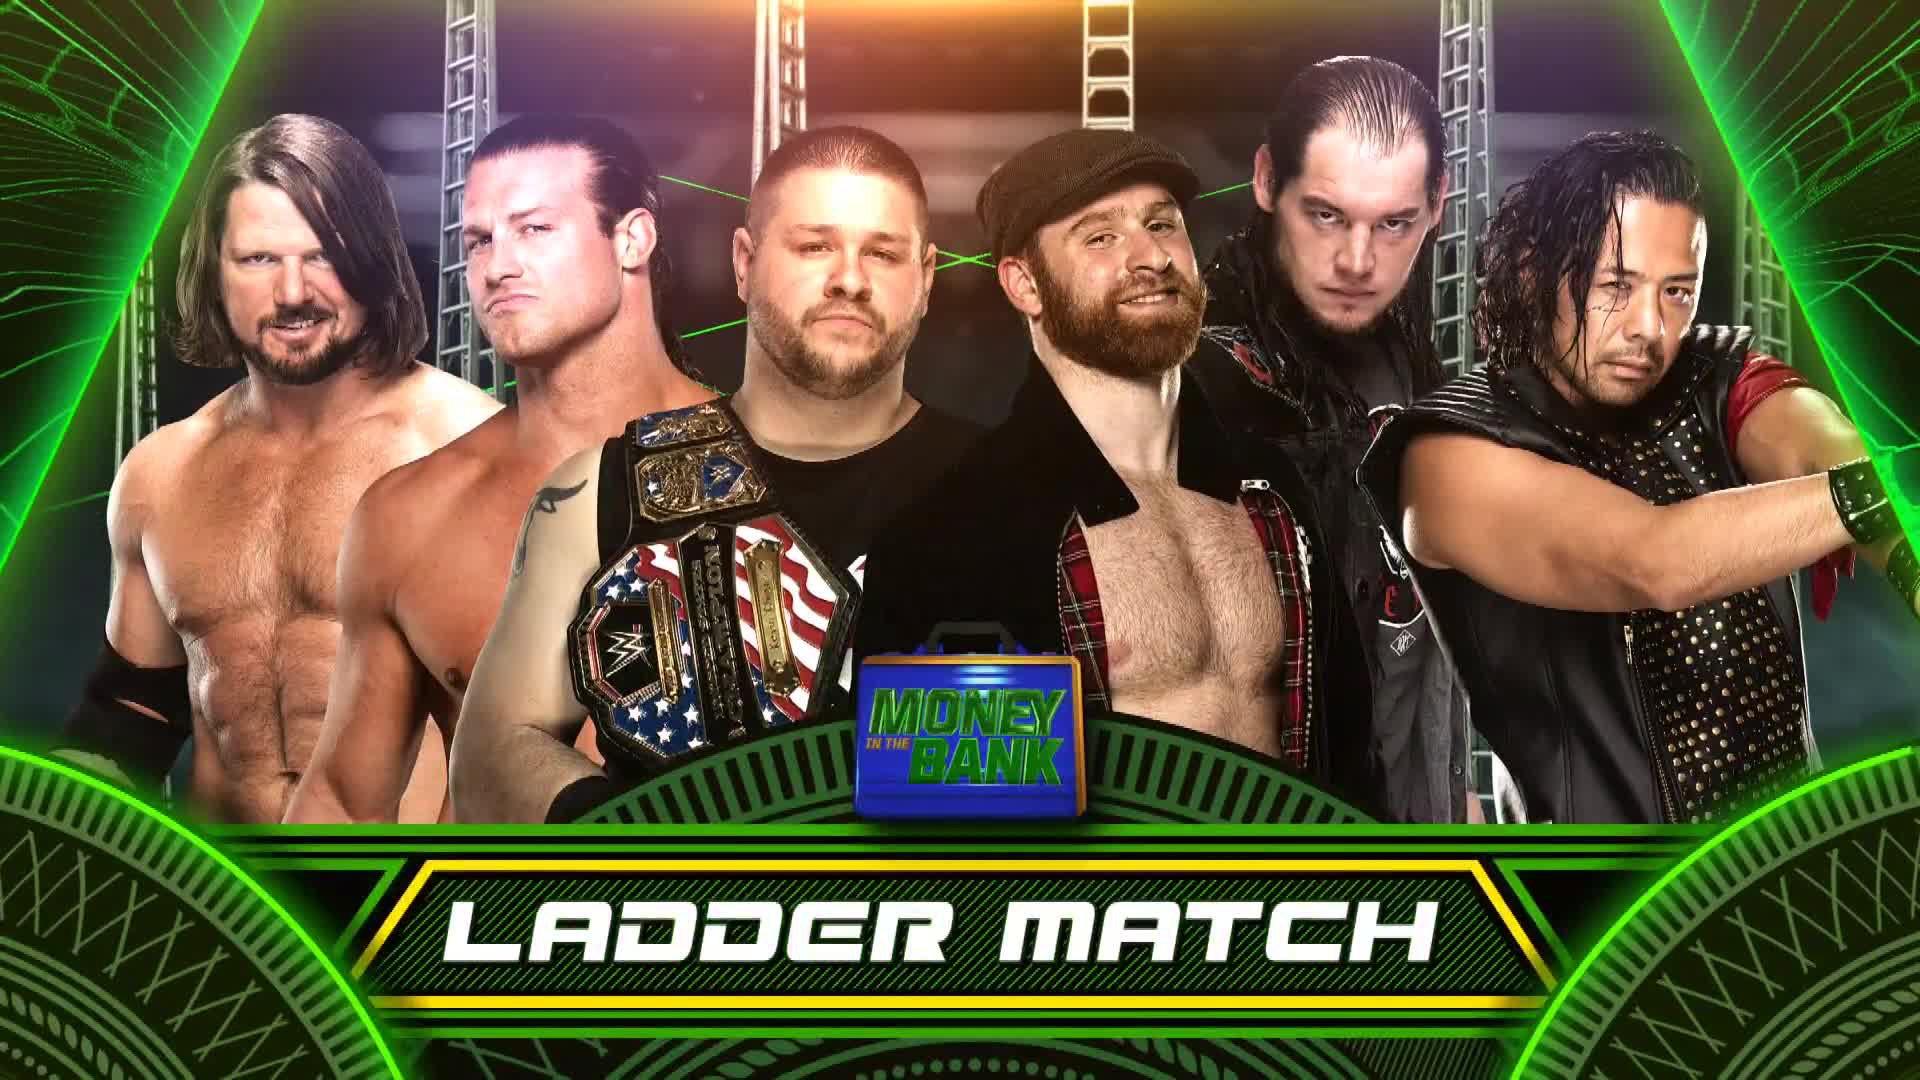 Witness the Men's and the first Women's Money in the Bank Ladder